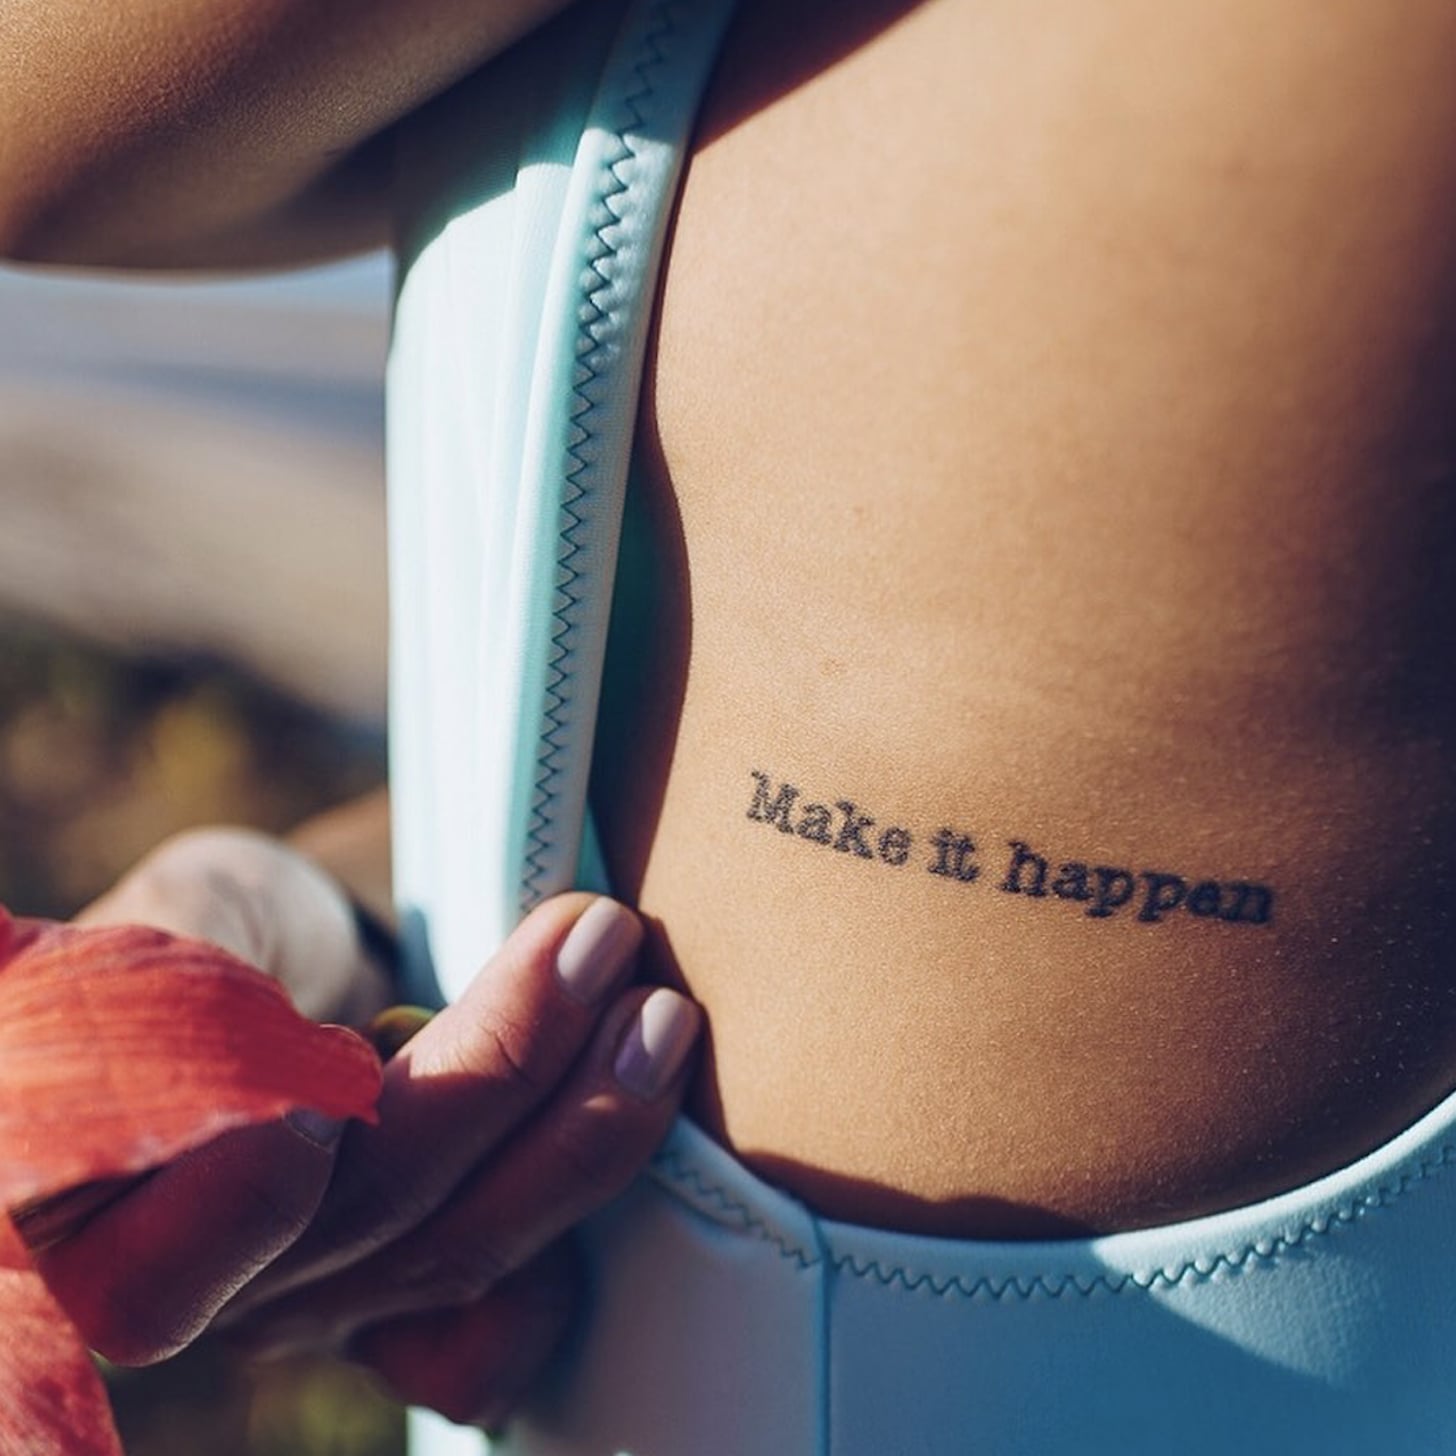 110 Short Inspirational Tattoo Quotes Ideas with Pictures